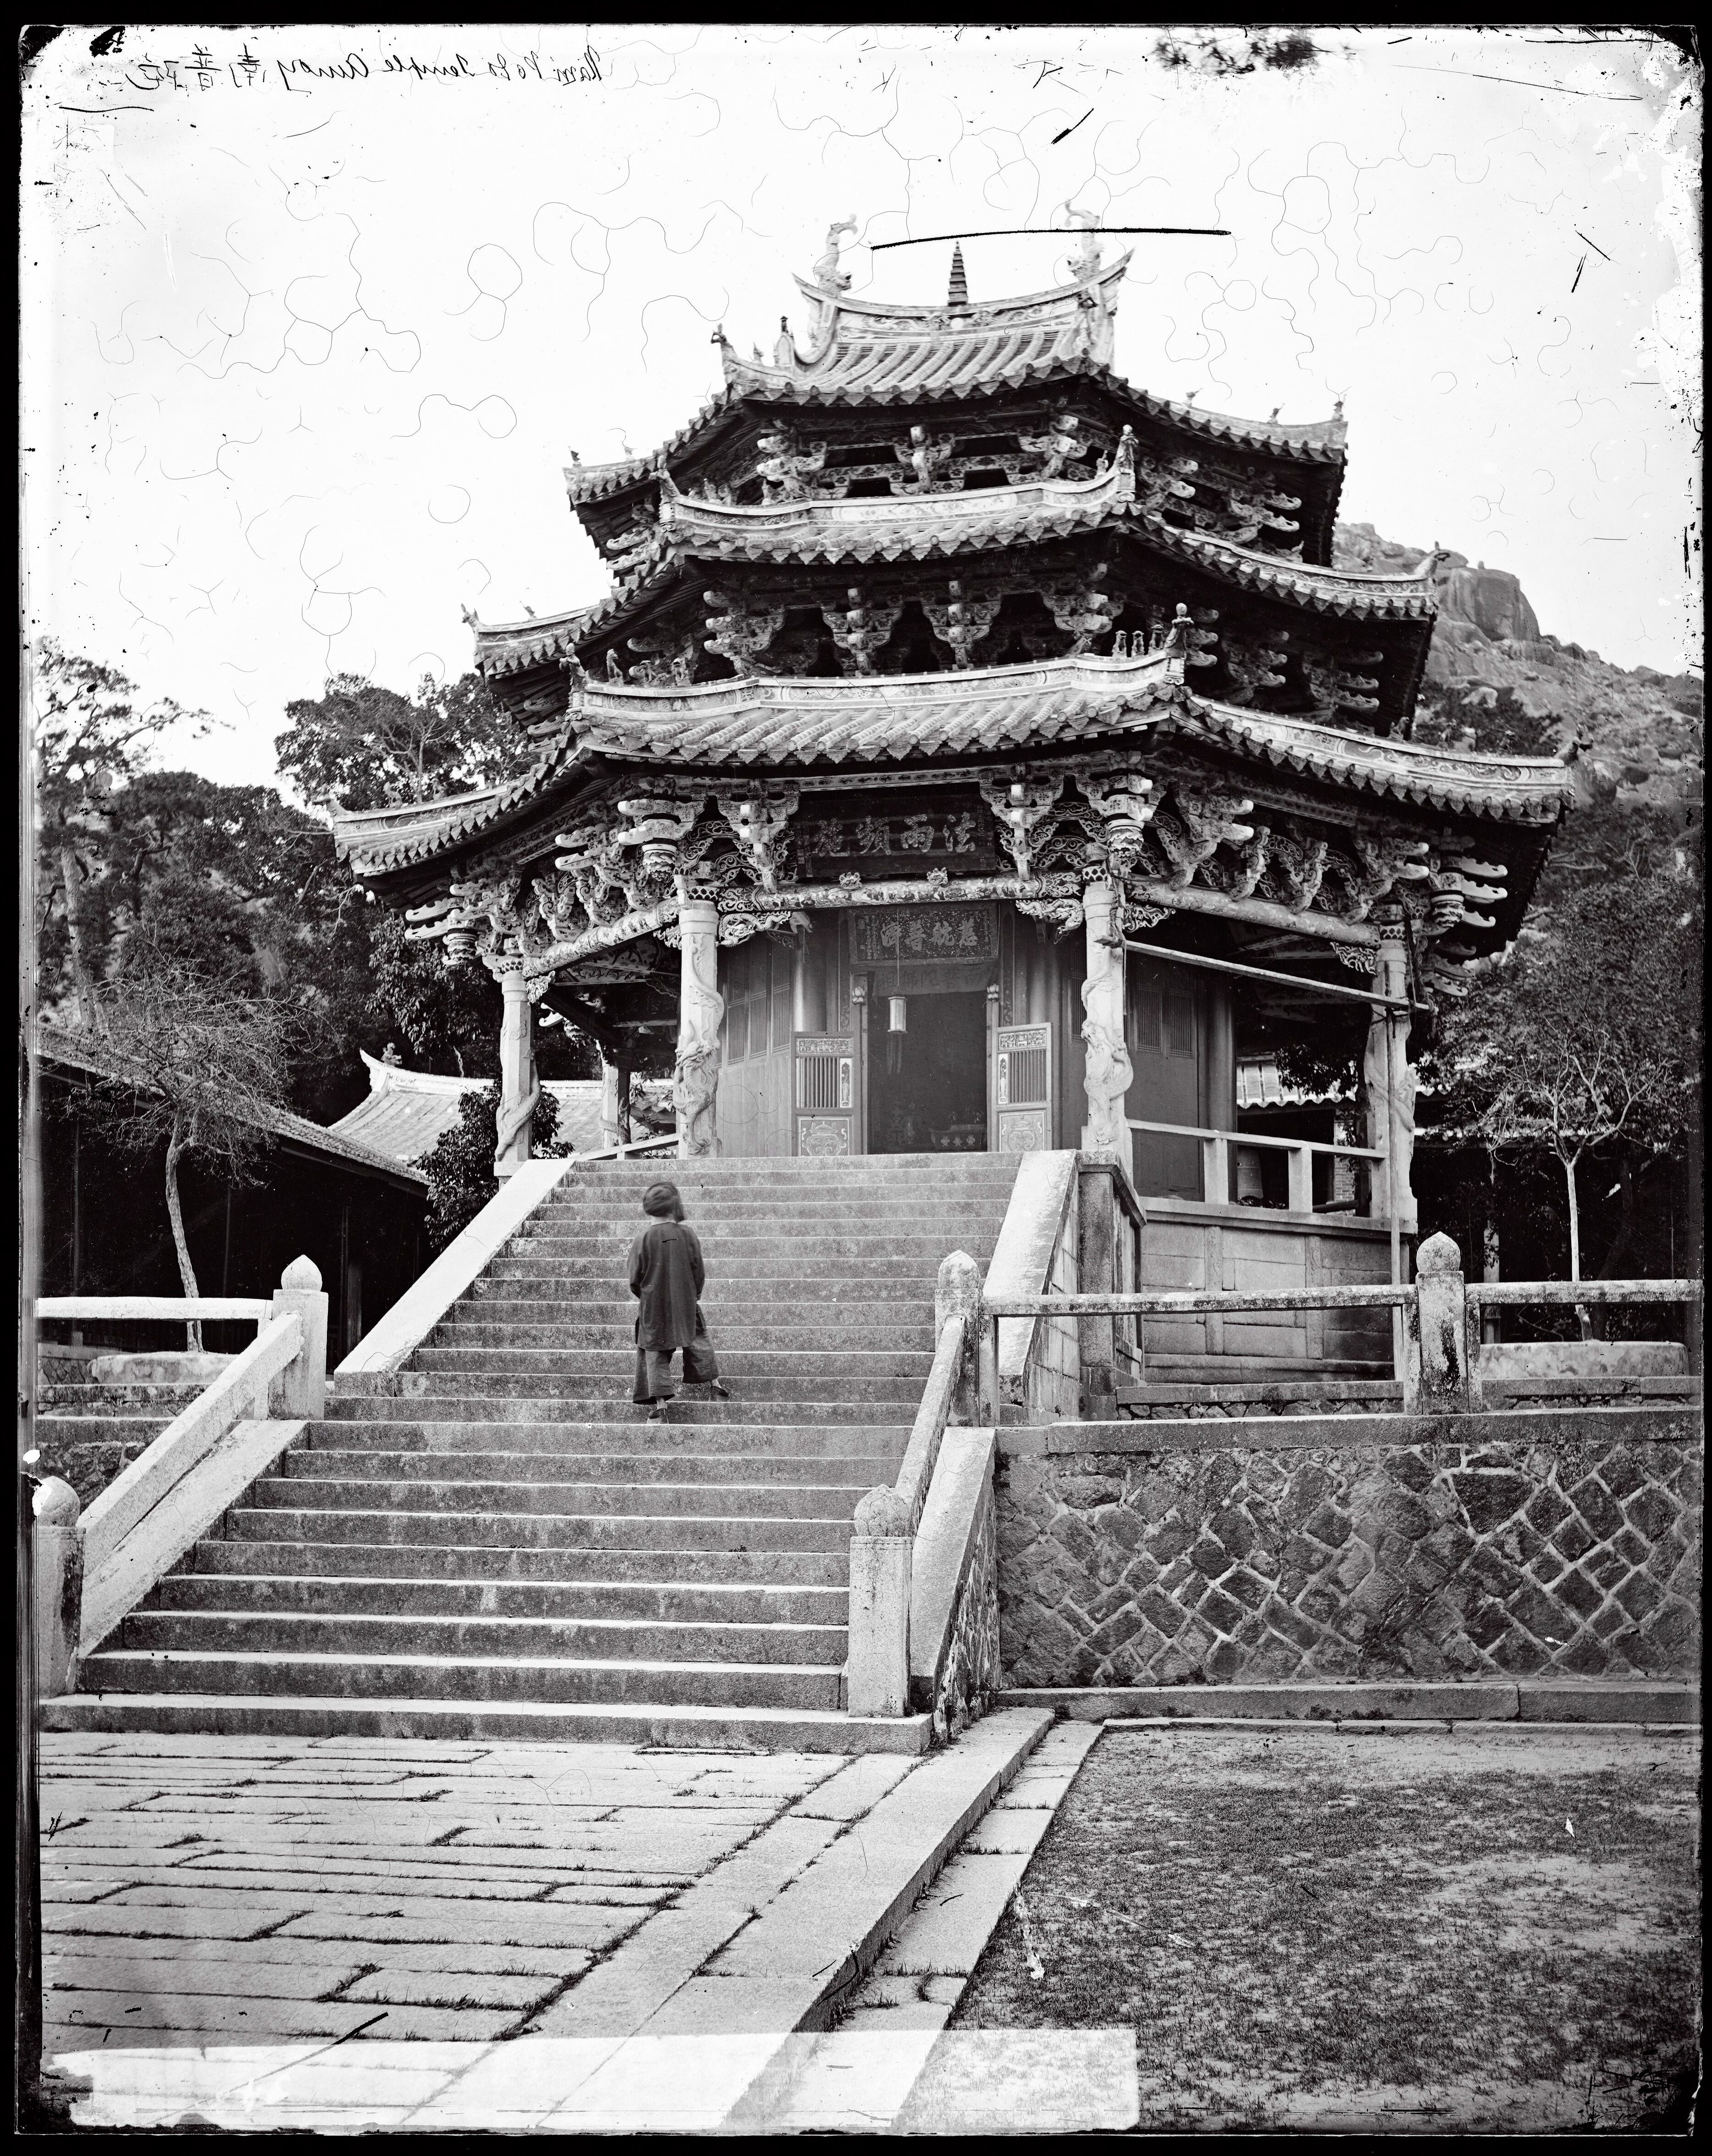 a person walking up stairs to a pagoda building